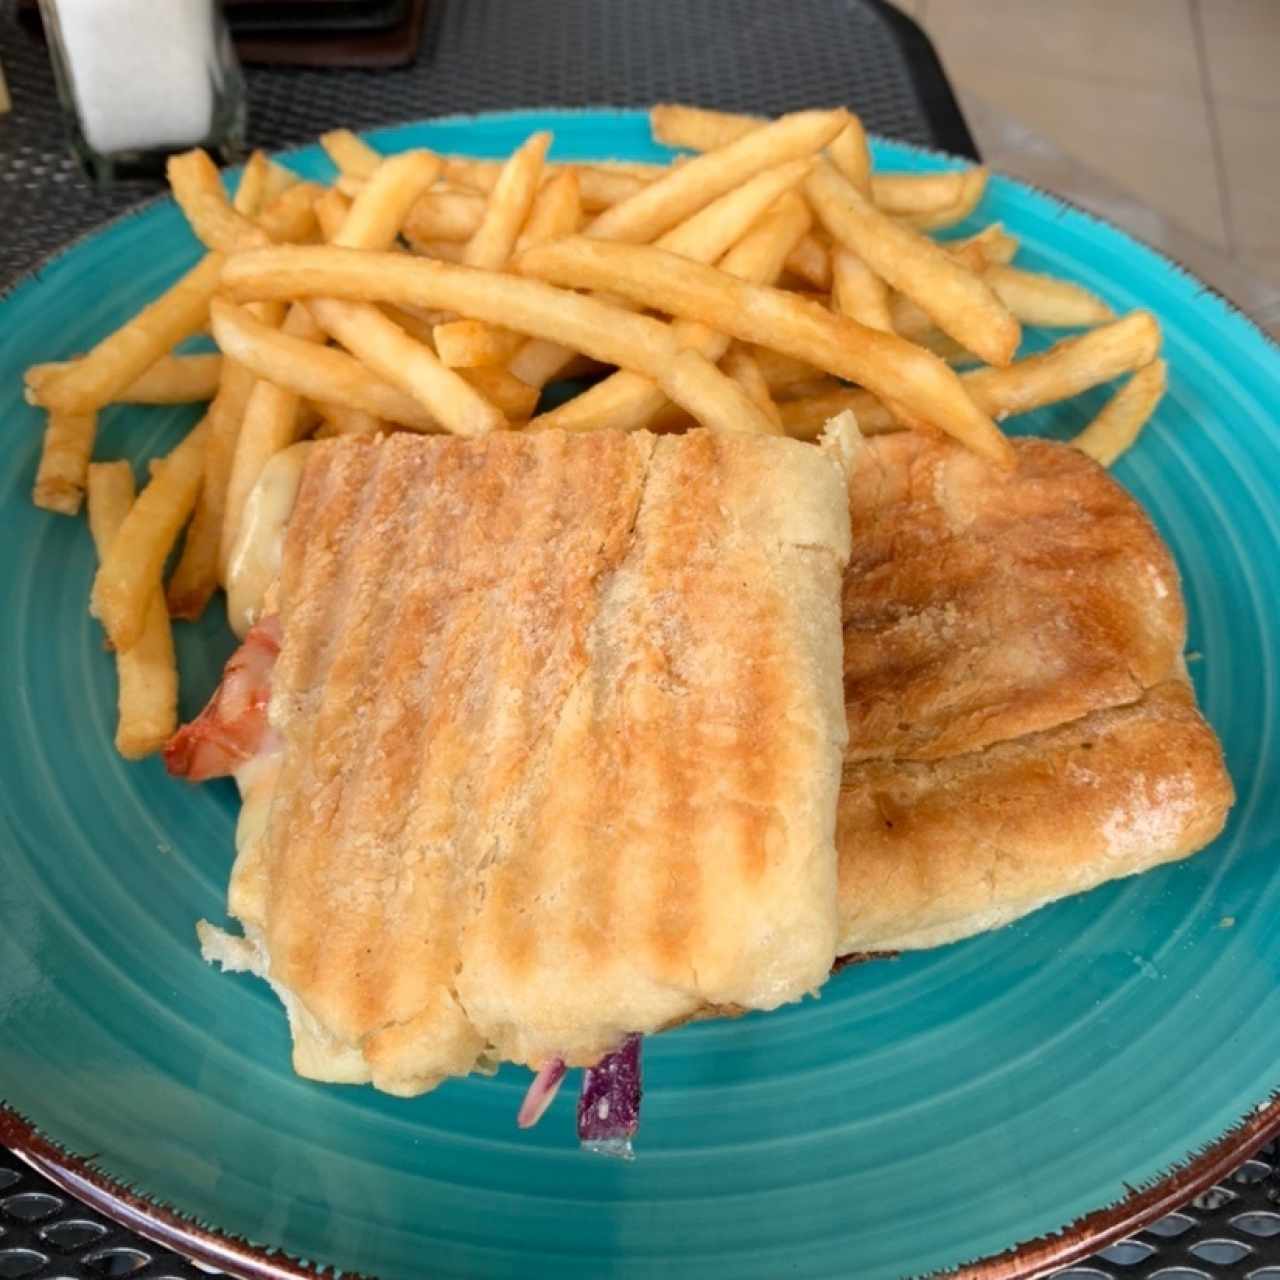 volcan sandwich with fries